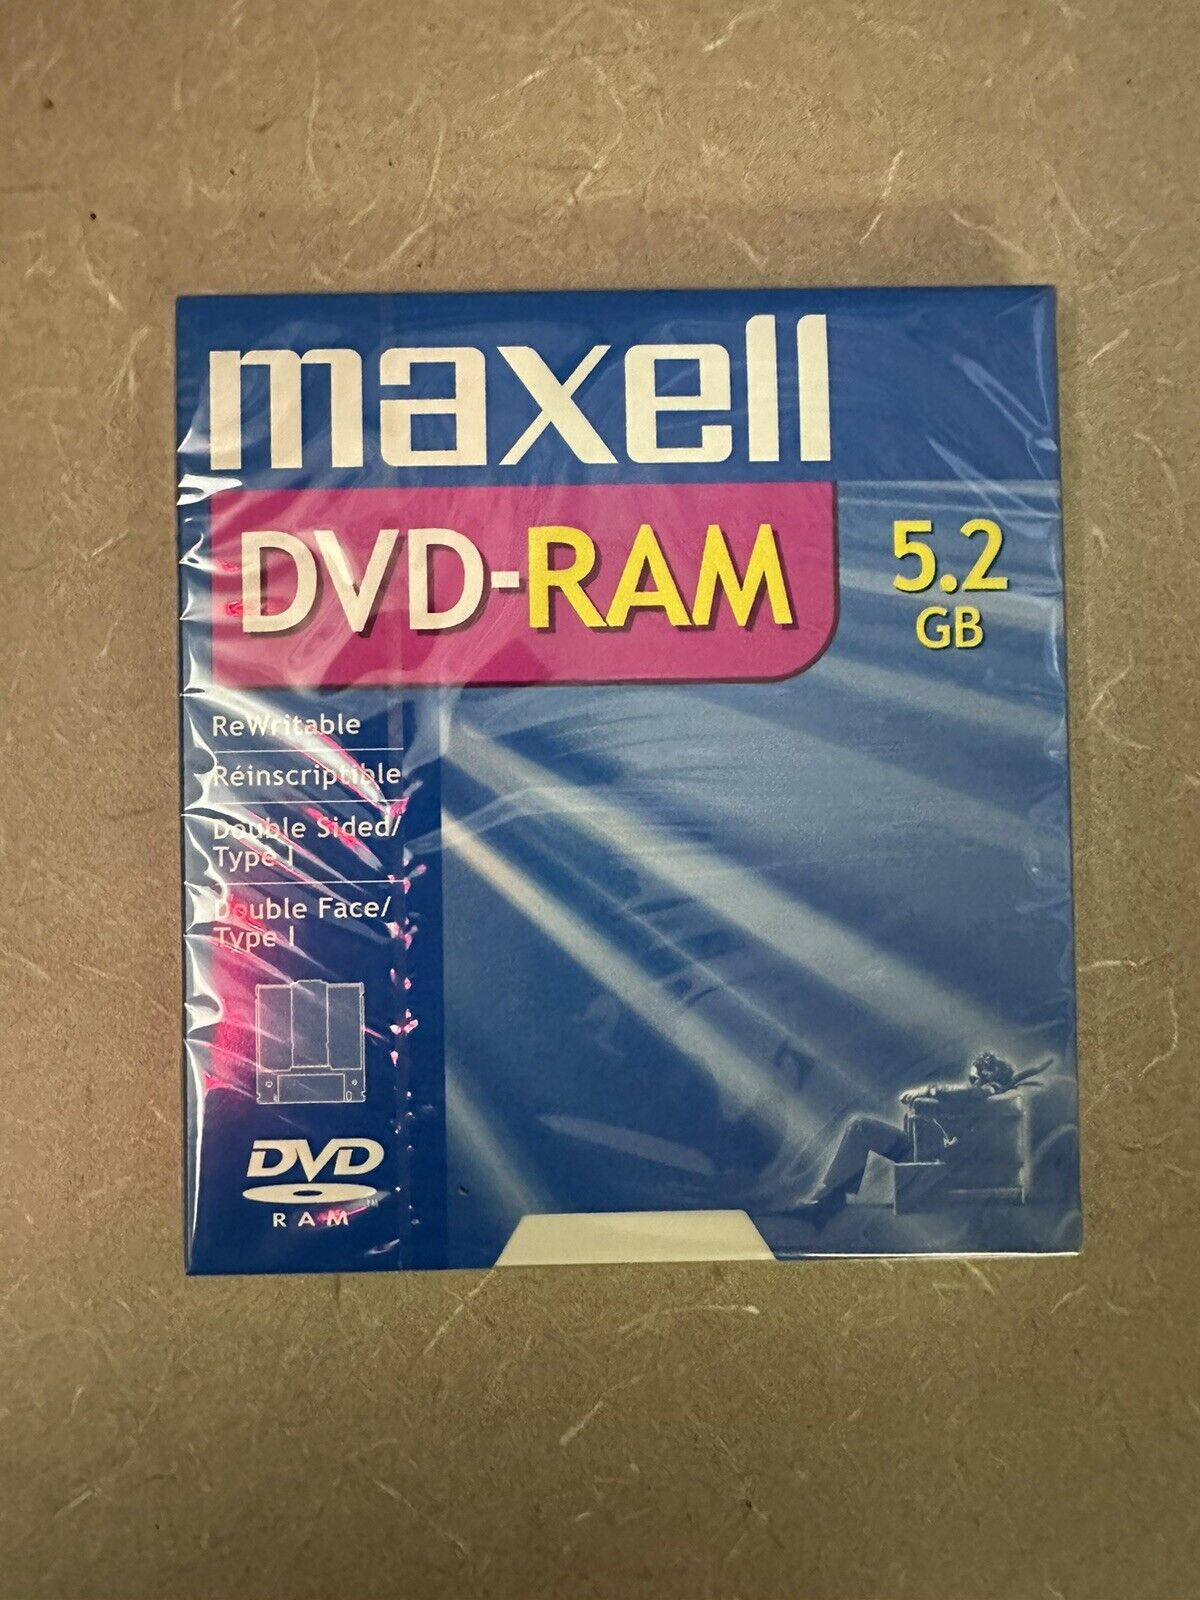 Maxell DVD-Ram Type I 5.2GB Double Sided DVD Ram Rewritable NEW SEALED